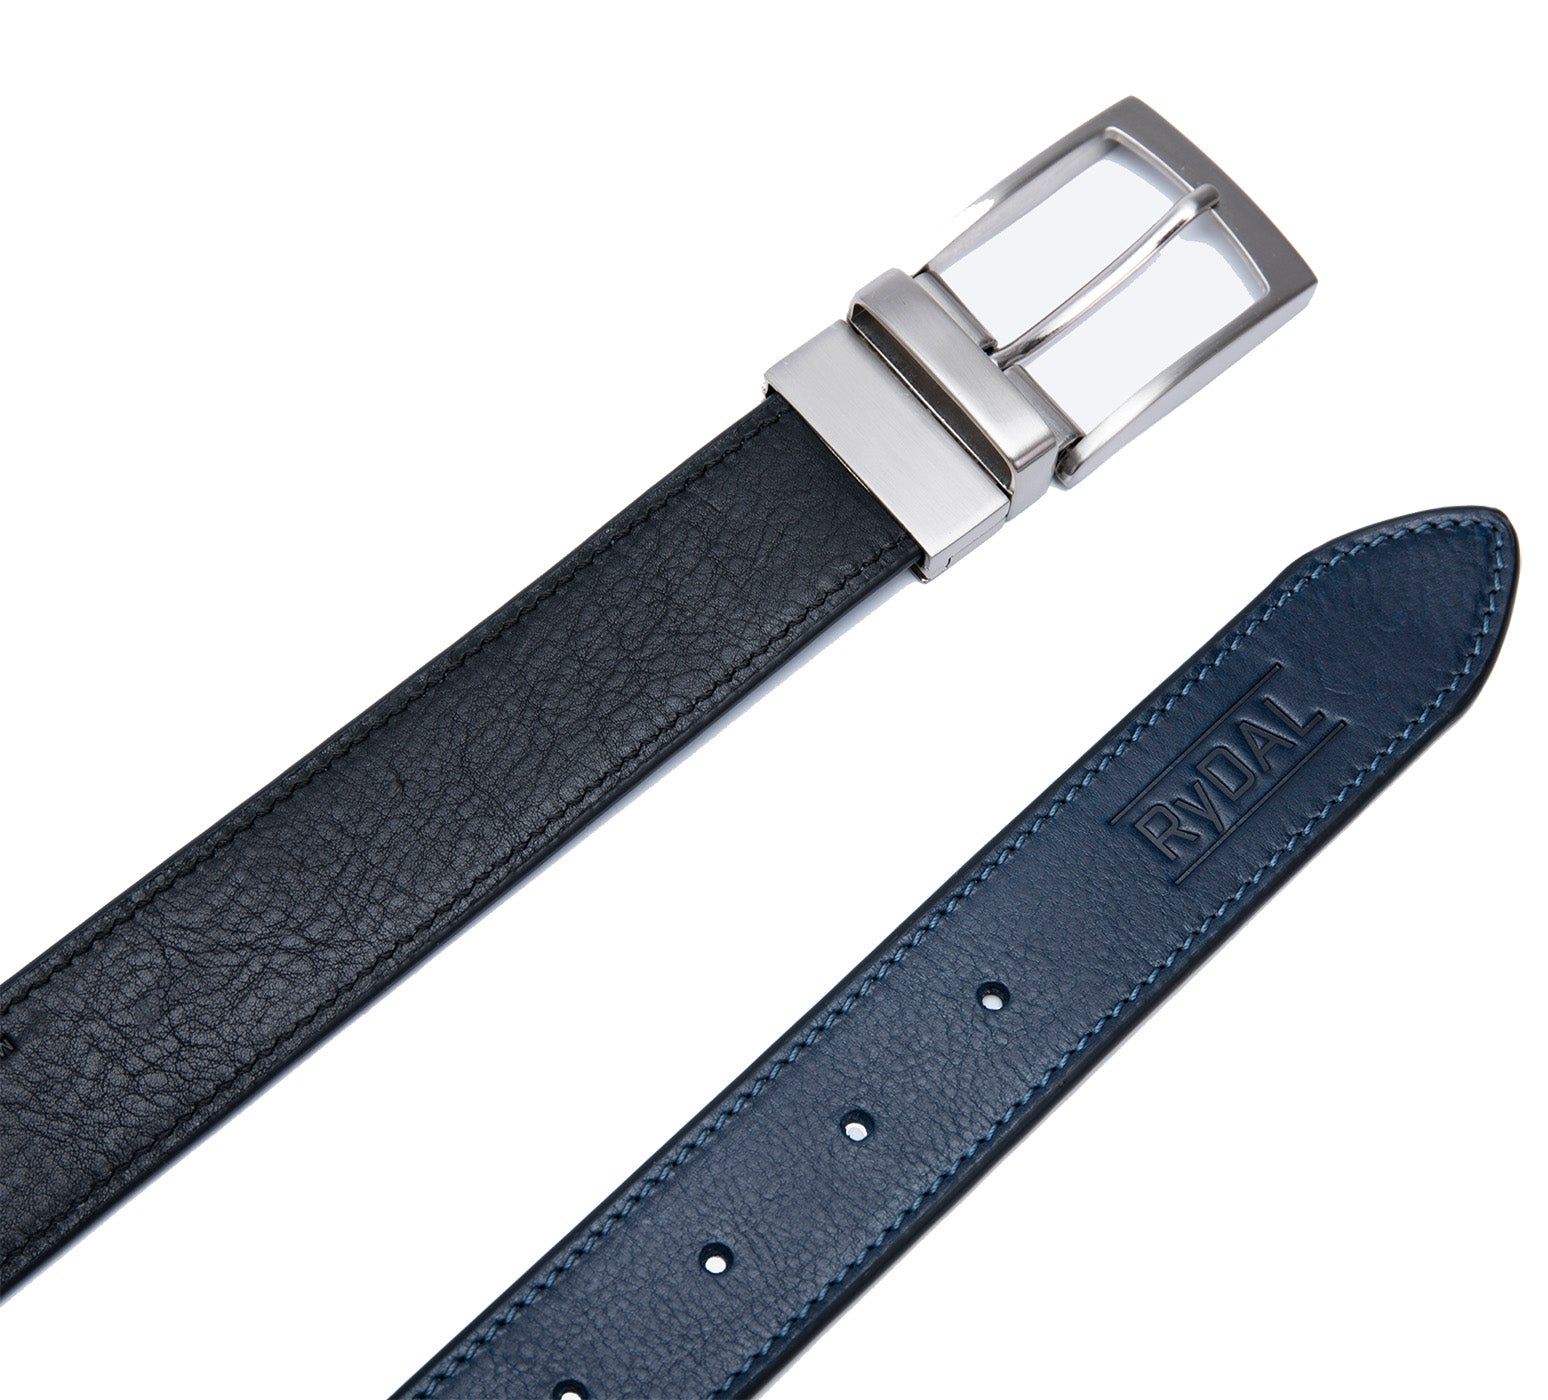 Firenze Mens Reversible Leather Belt from Rydal in 'Black/Royal Blue' showing both sides.